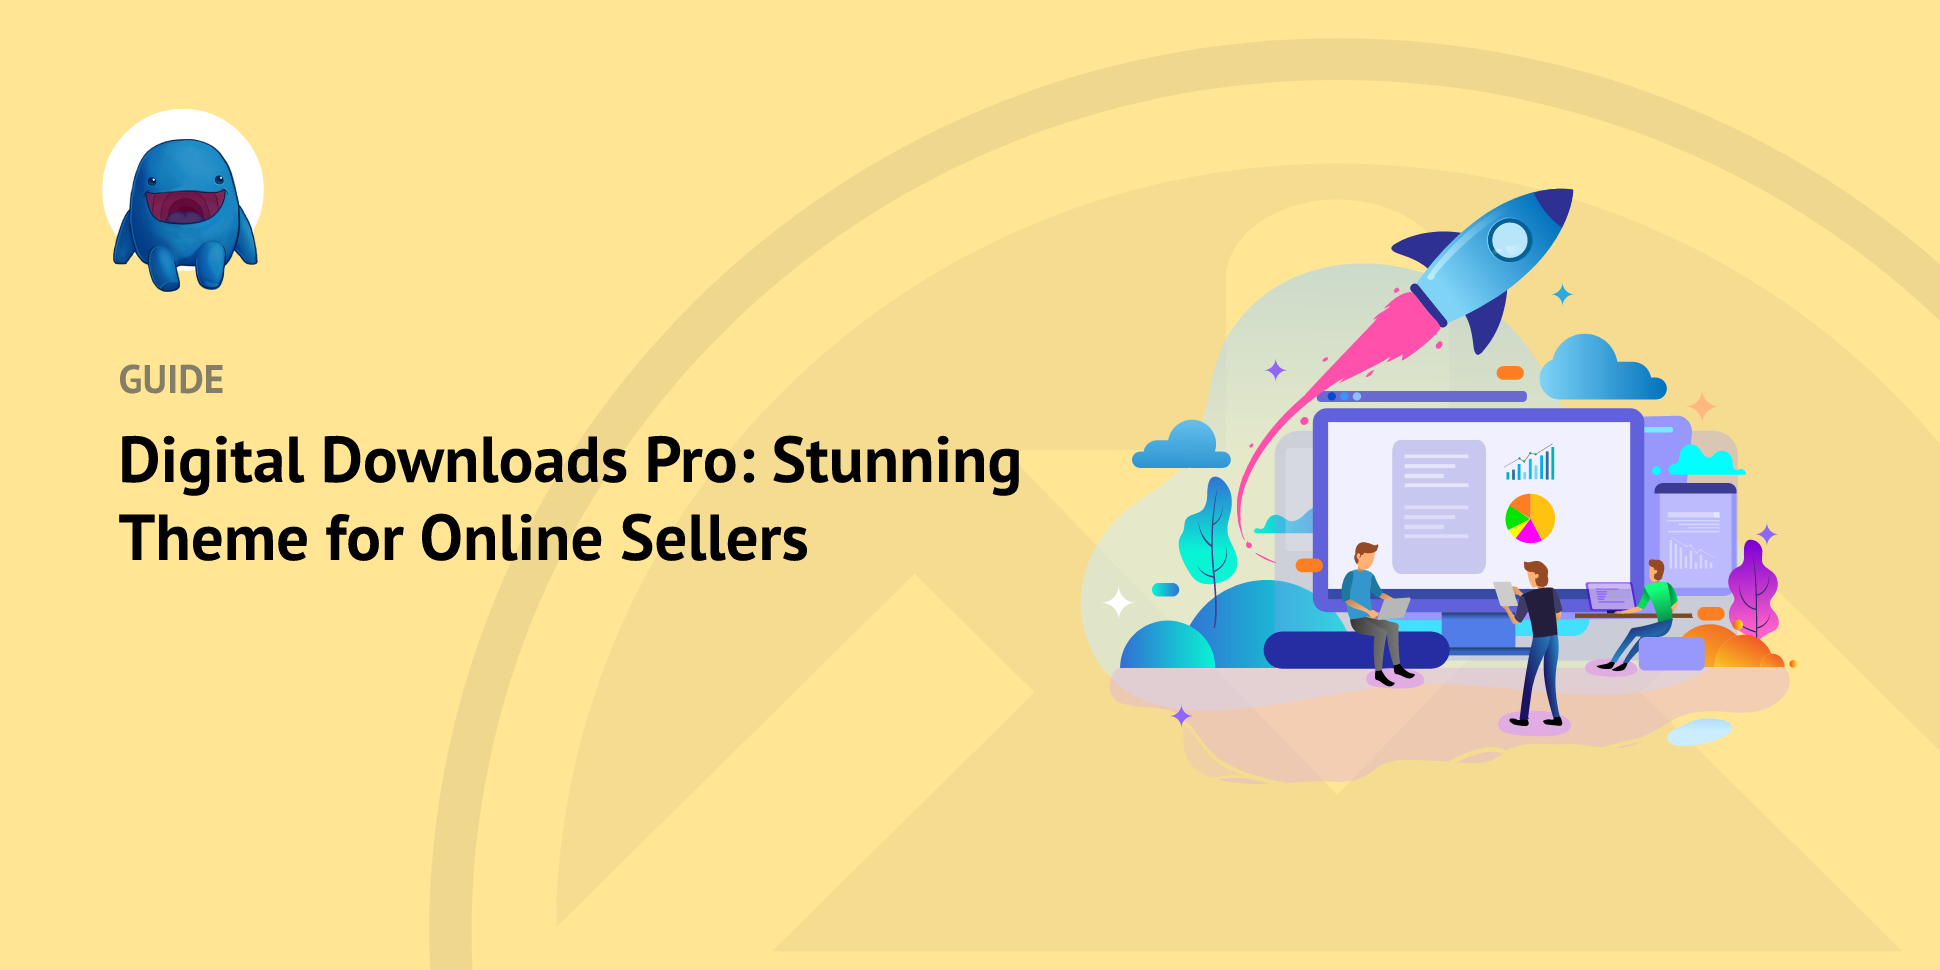 Digital Downloads Pro: brandiD's Stunning New Theme for Online Sellers